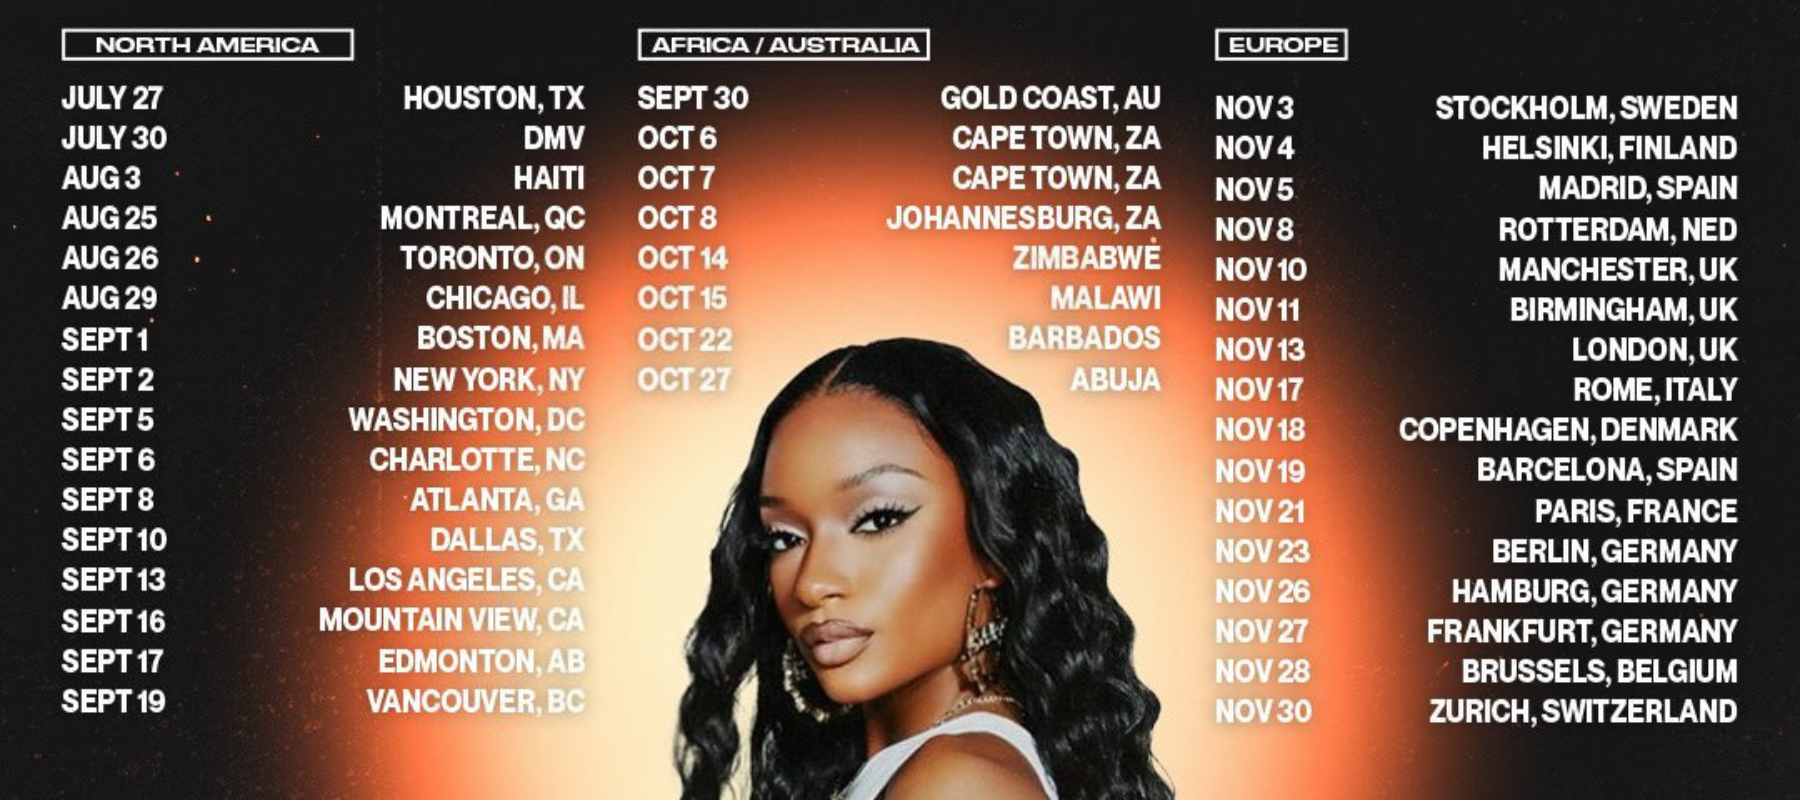 Ayra Starr has Announced her First World Tour, “21: The World Tour”